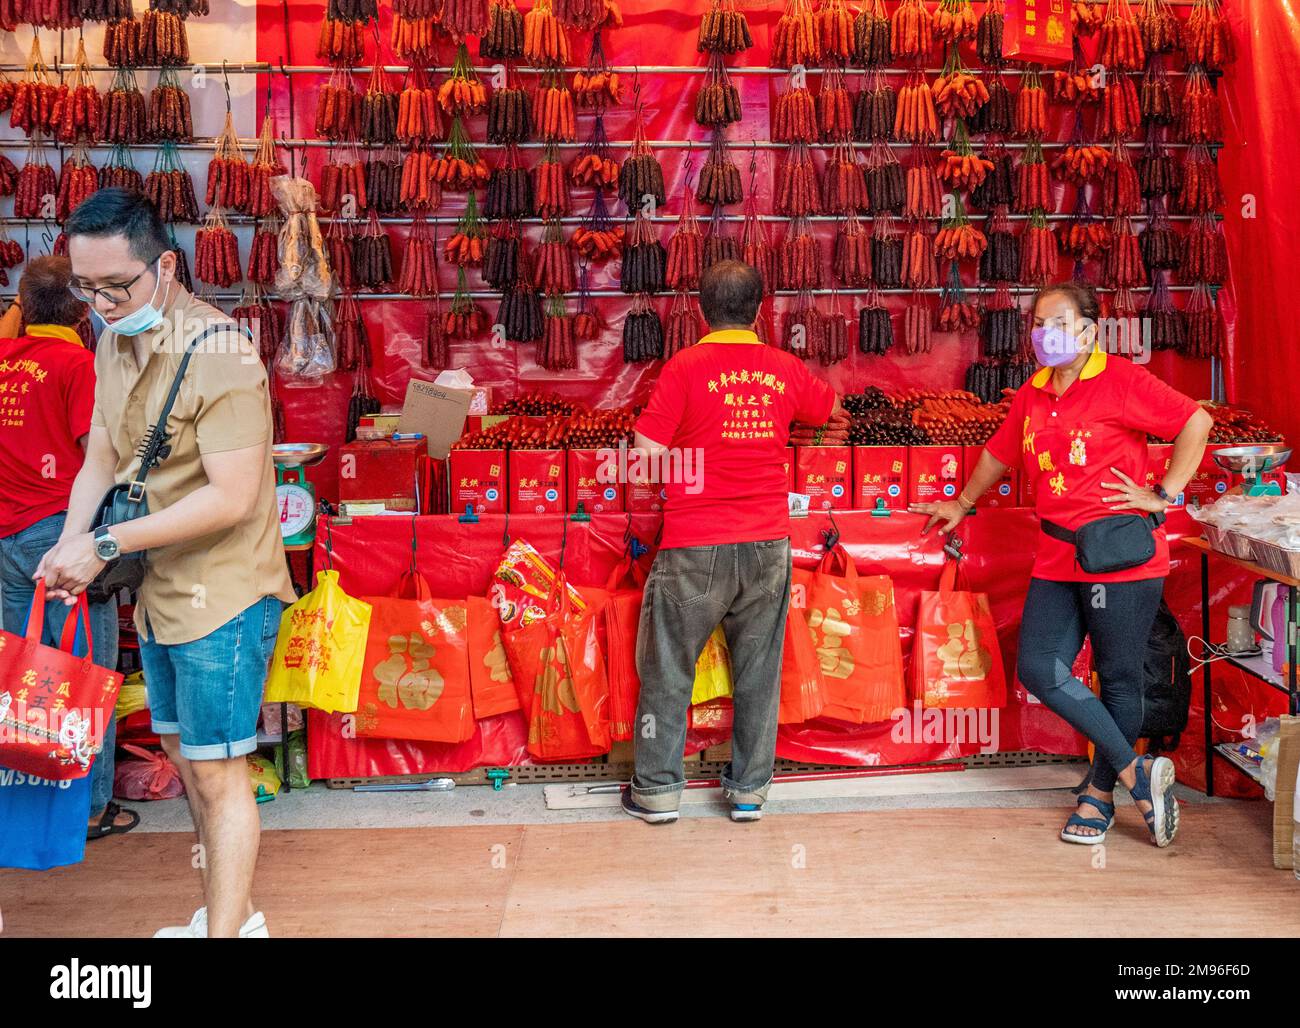 Market stall selling Chinese dried cured sausages for Chinese New Year in Chinatown Singapore. Stock Photo